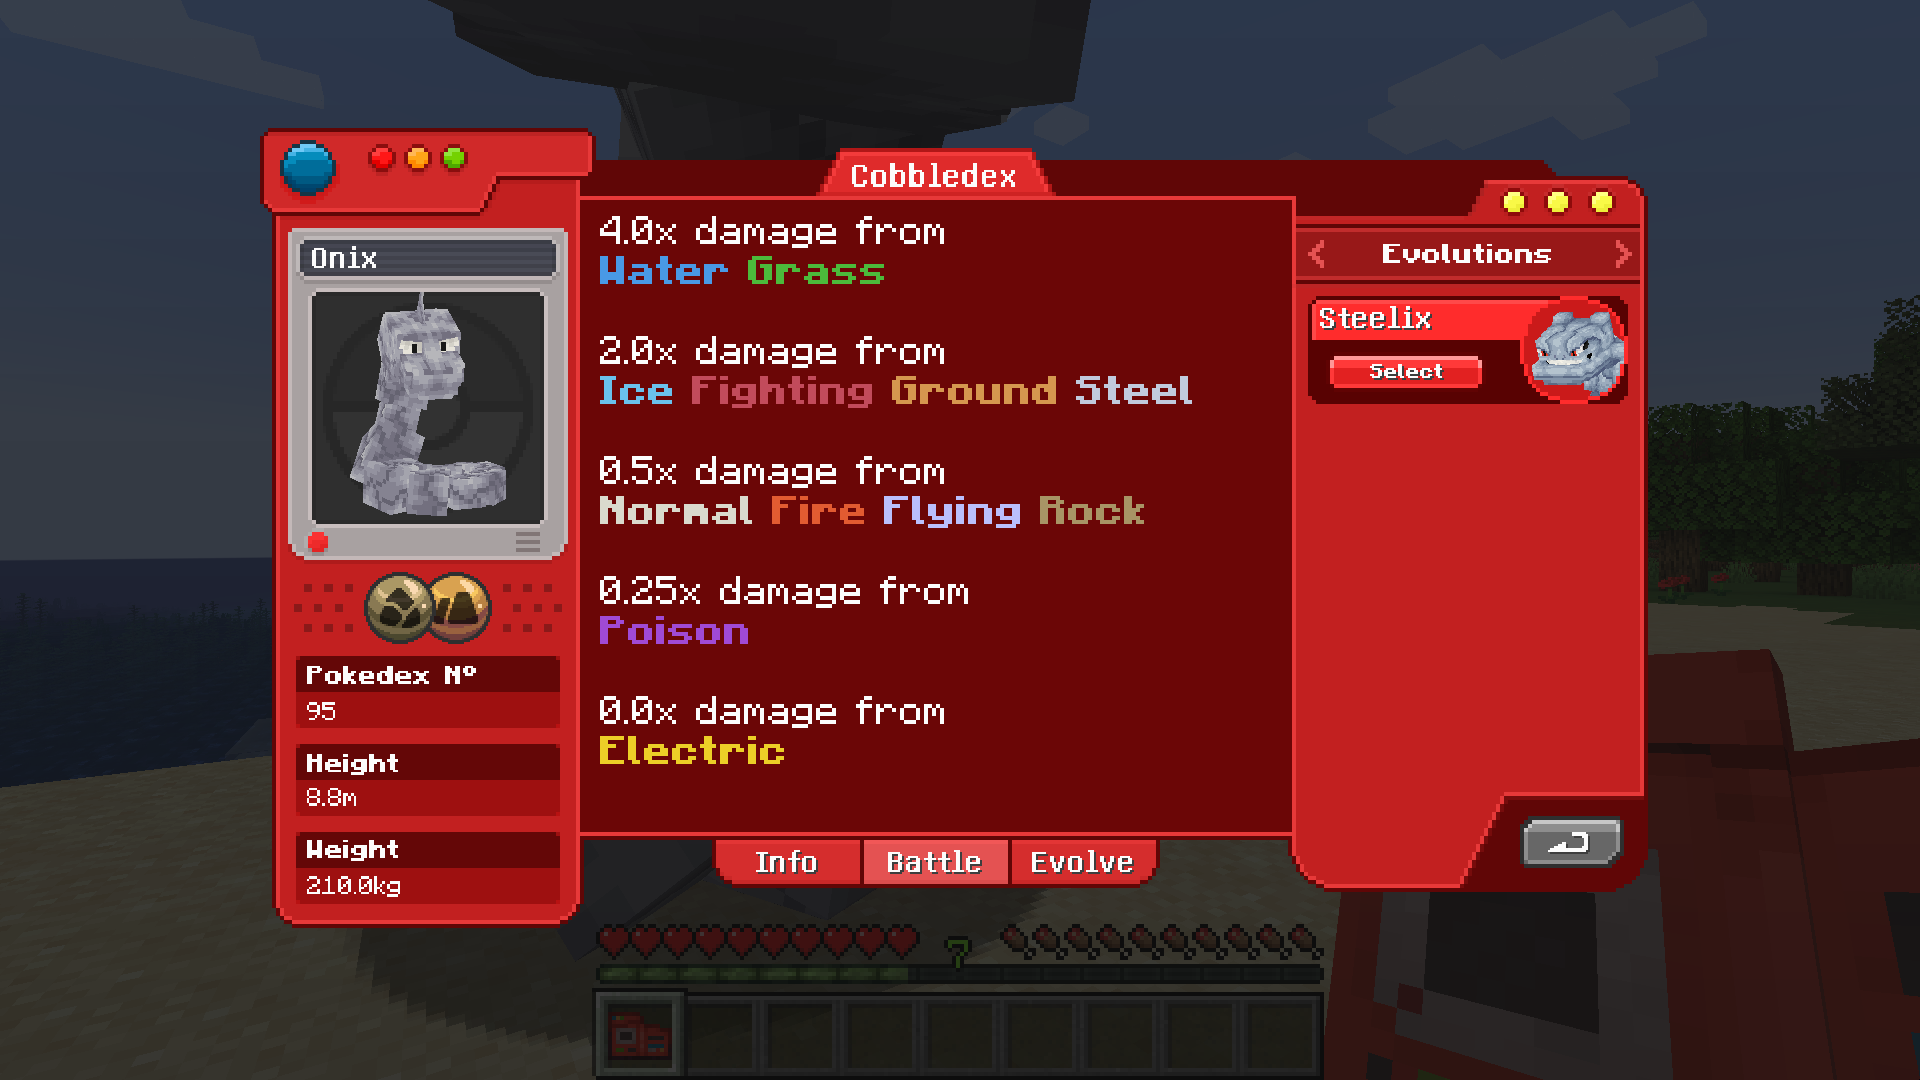 A image showing how Cobbledex looks in game, showing "Effective Types" feature.